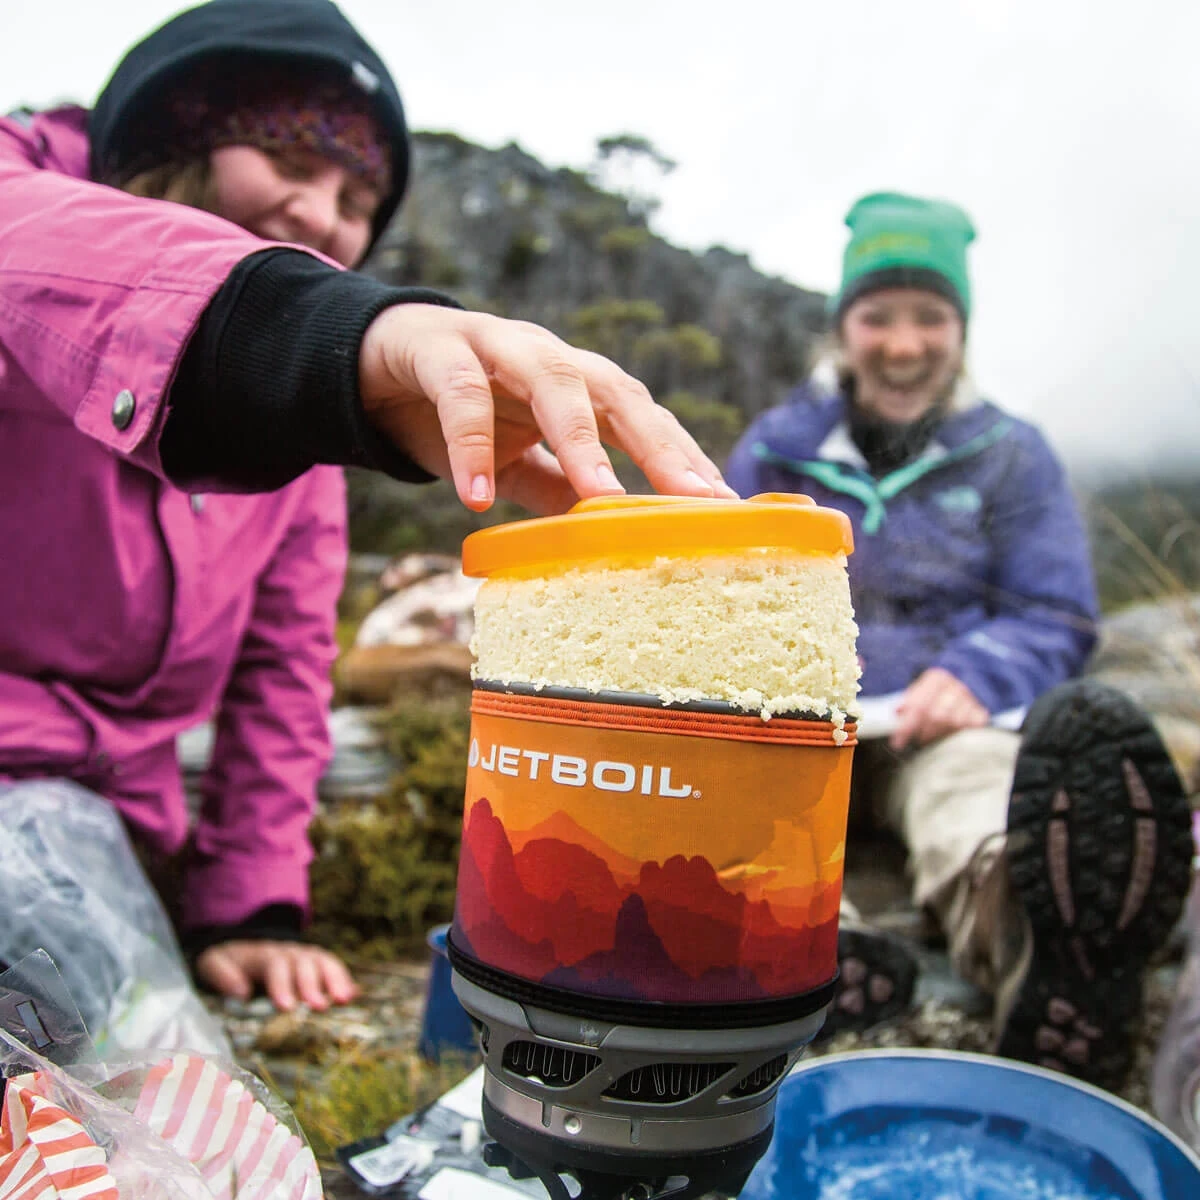 Pulling out cooked couscous from a Jetboil MiniMo cooking system